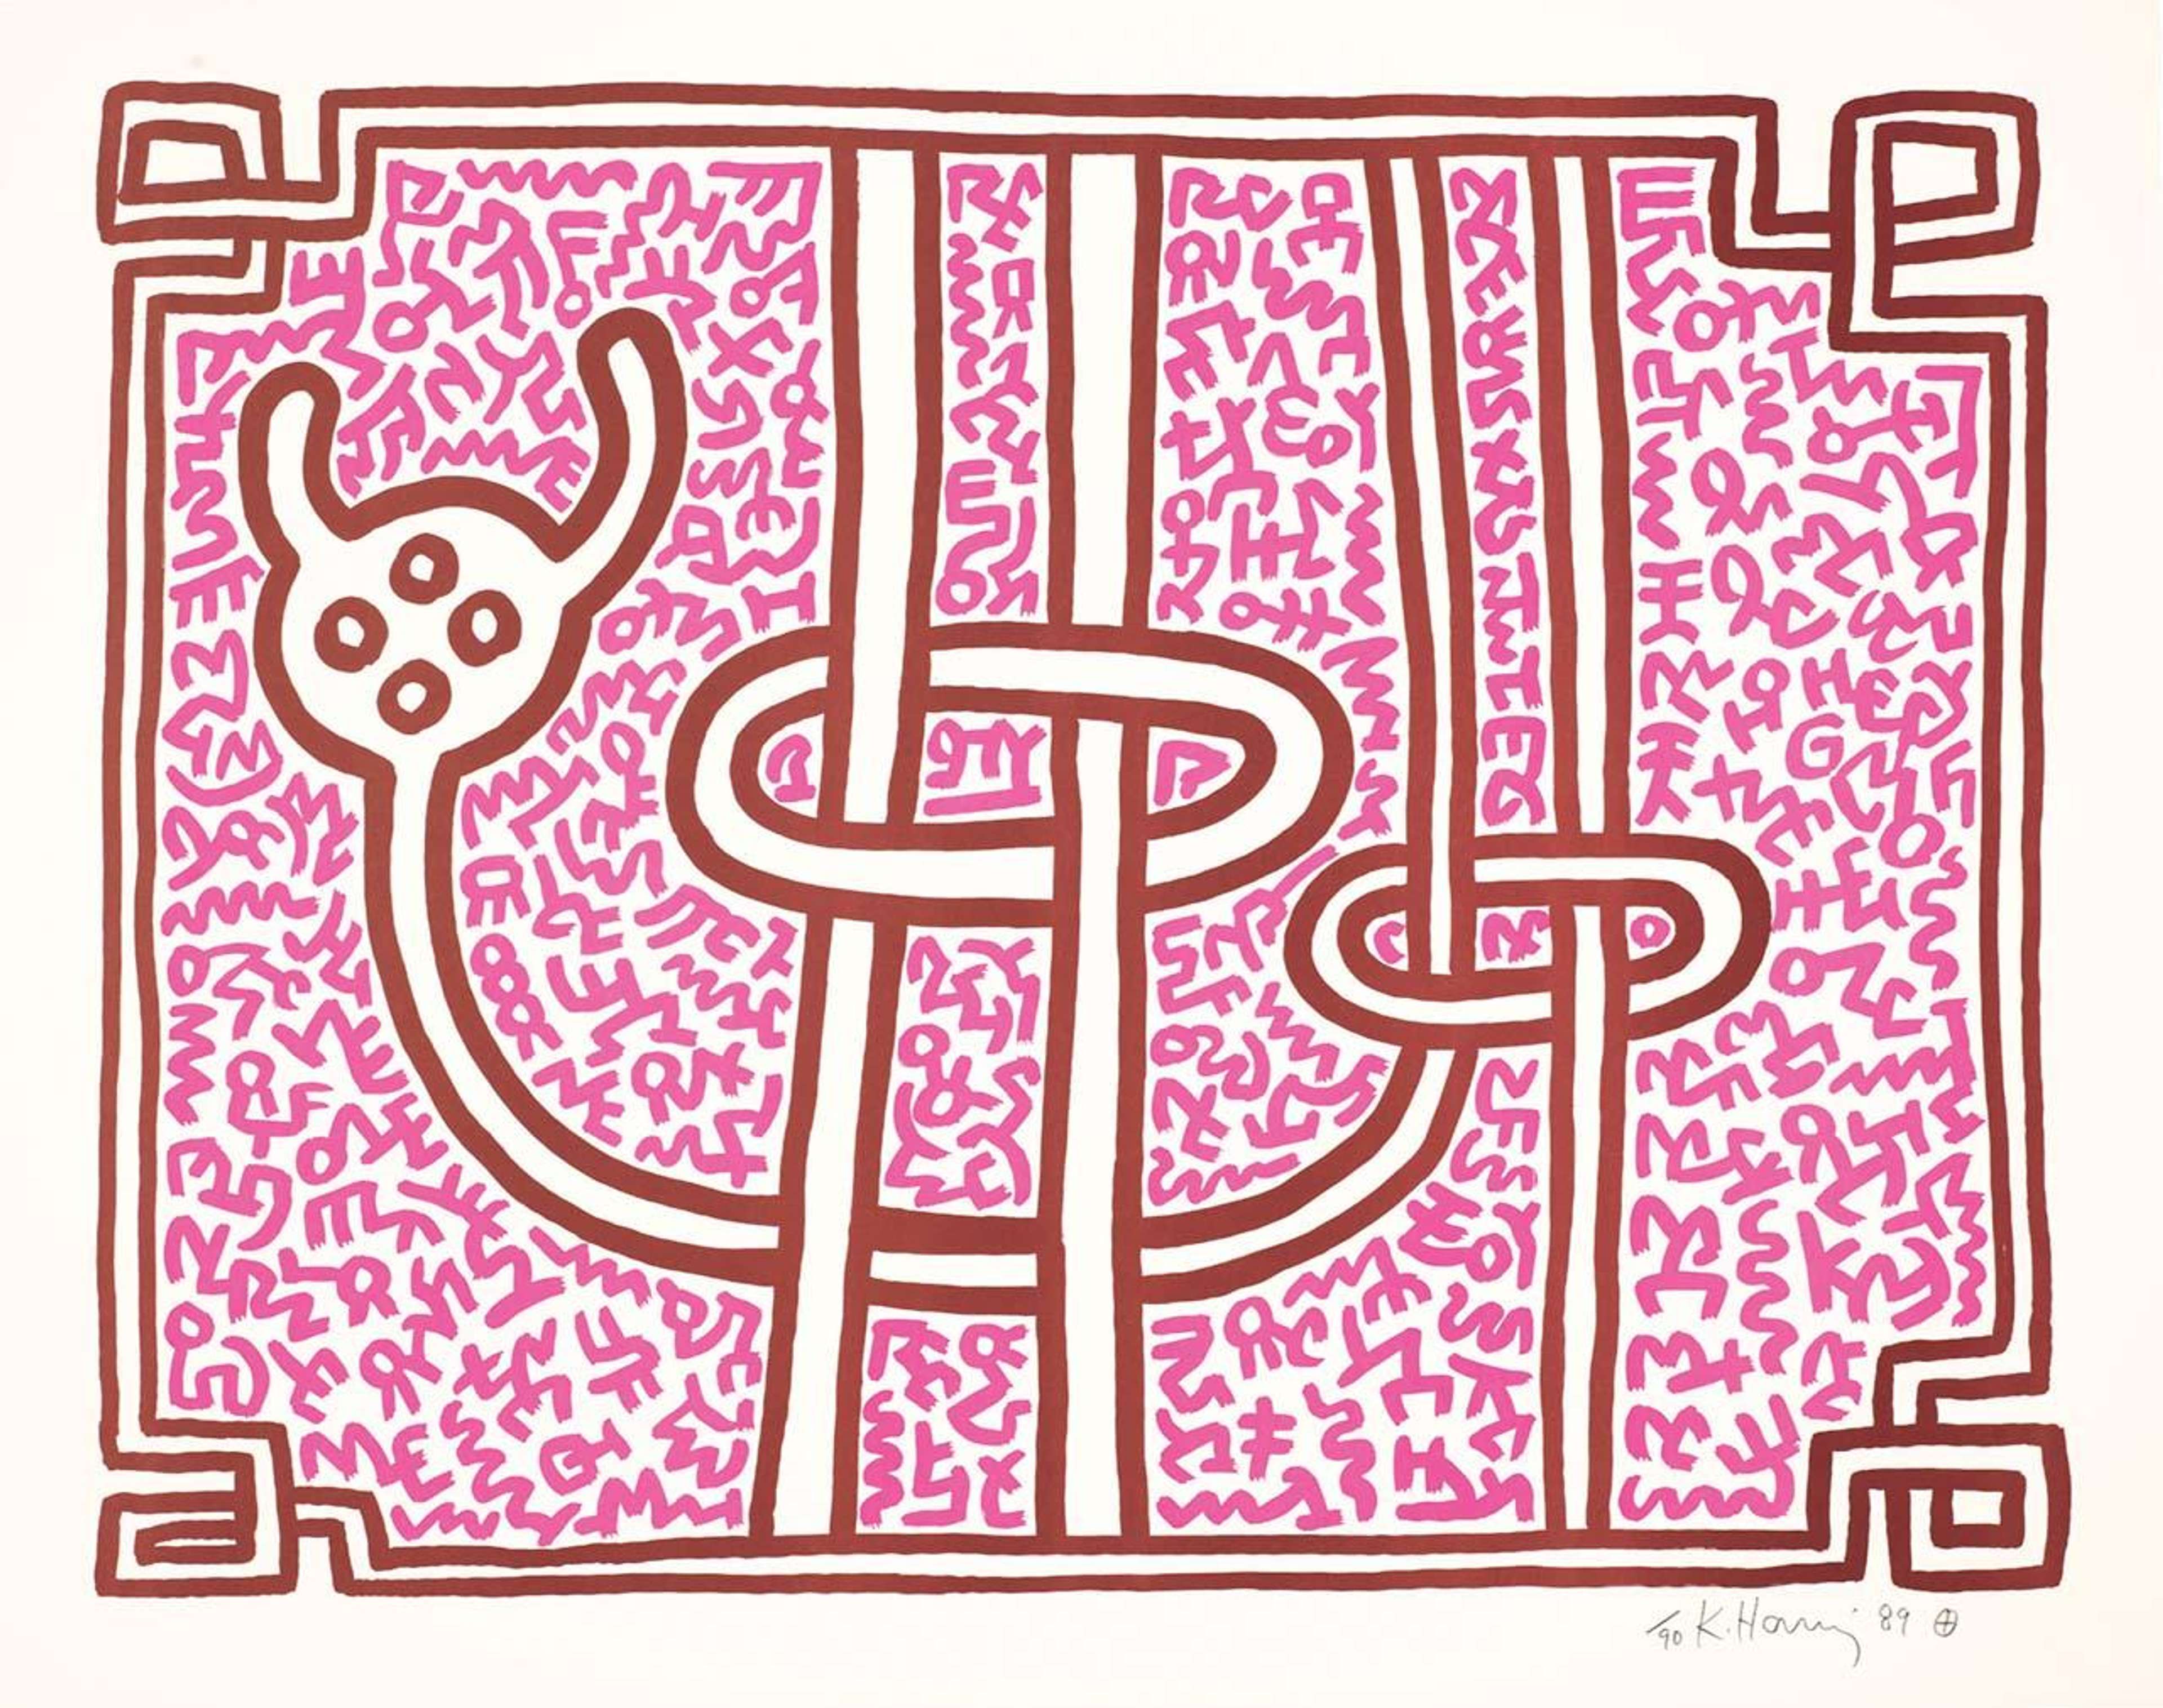 Keith Haring’s Chocolate Buddha 3. A Pop Art lithograph of an aboriginal inspired abstract figure against a pink patterned background.